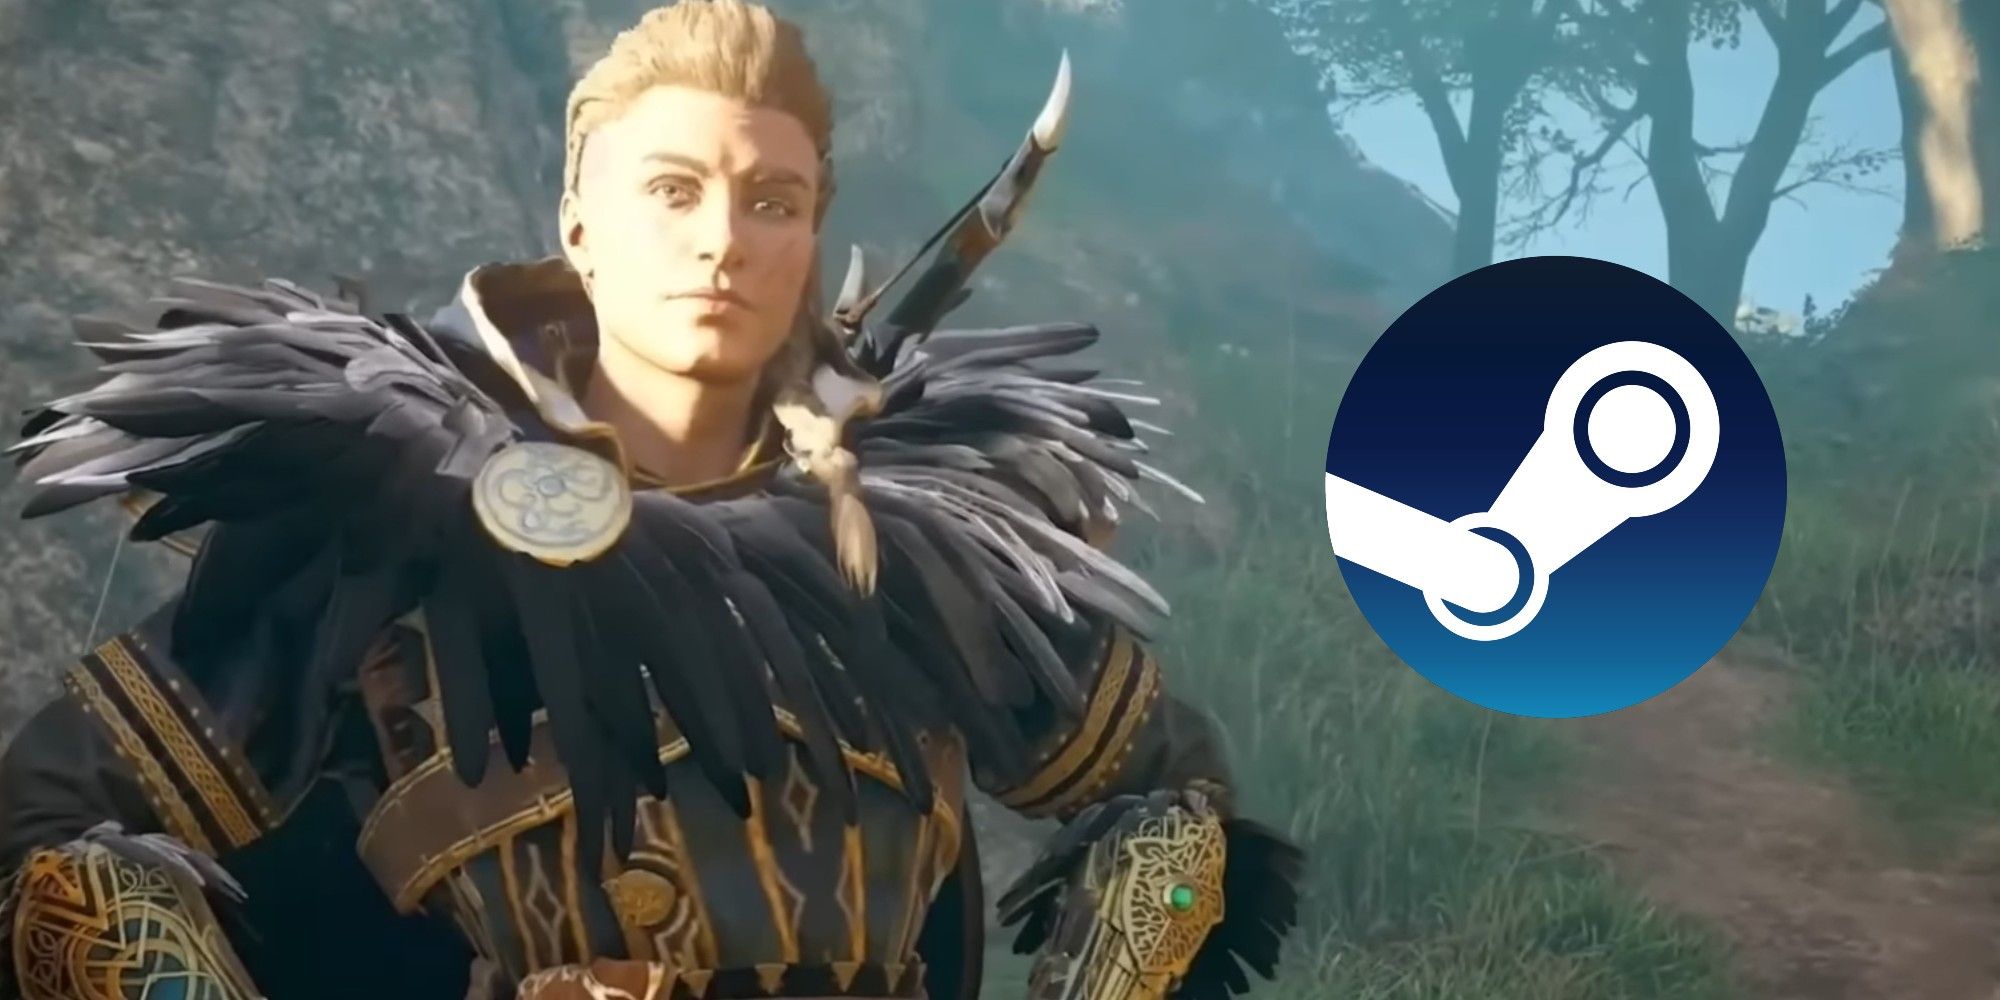 Screenshot of Assassins Creed Valhalla DLC trailer with the Steam Logo included